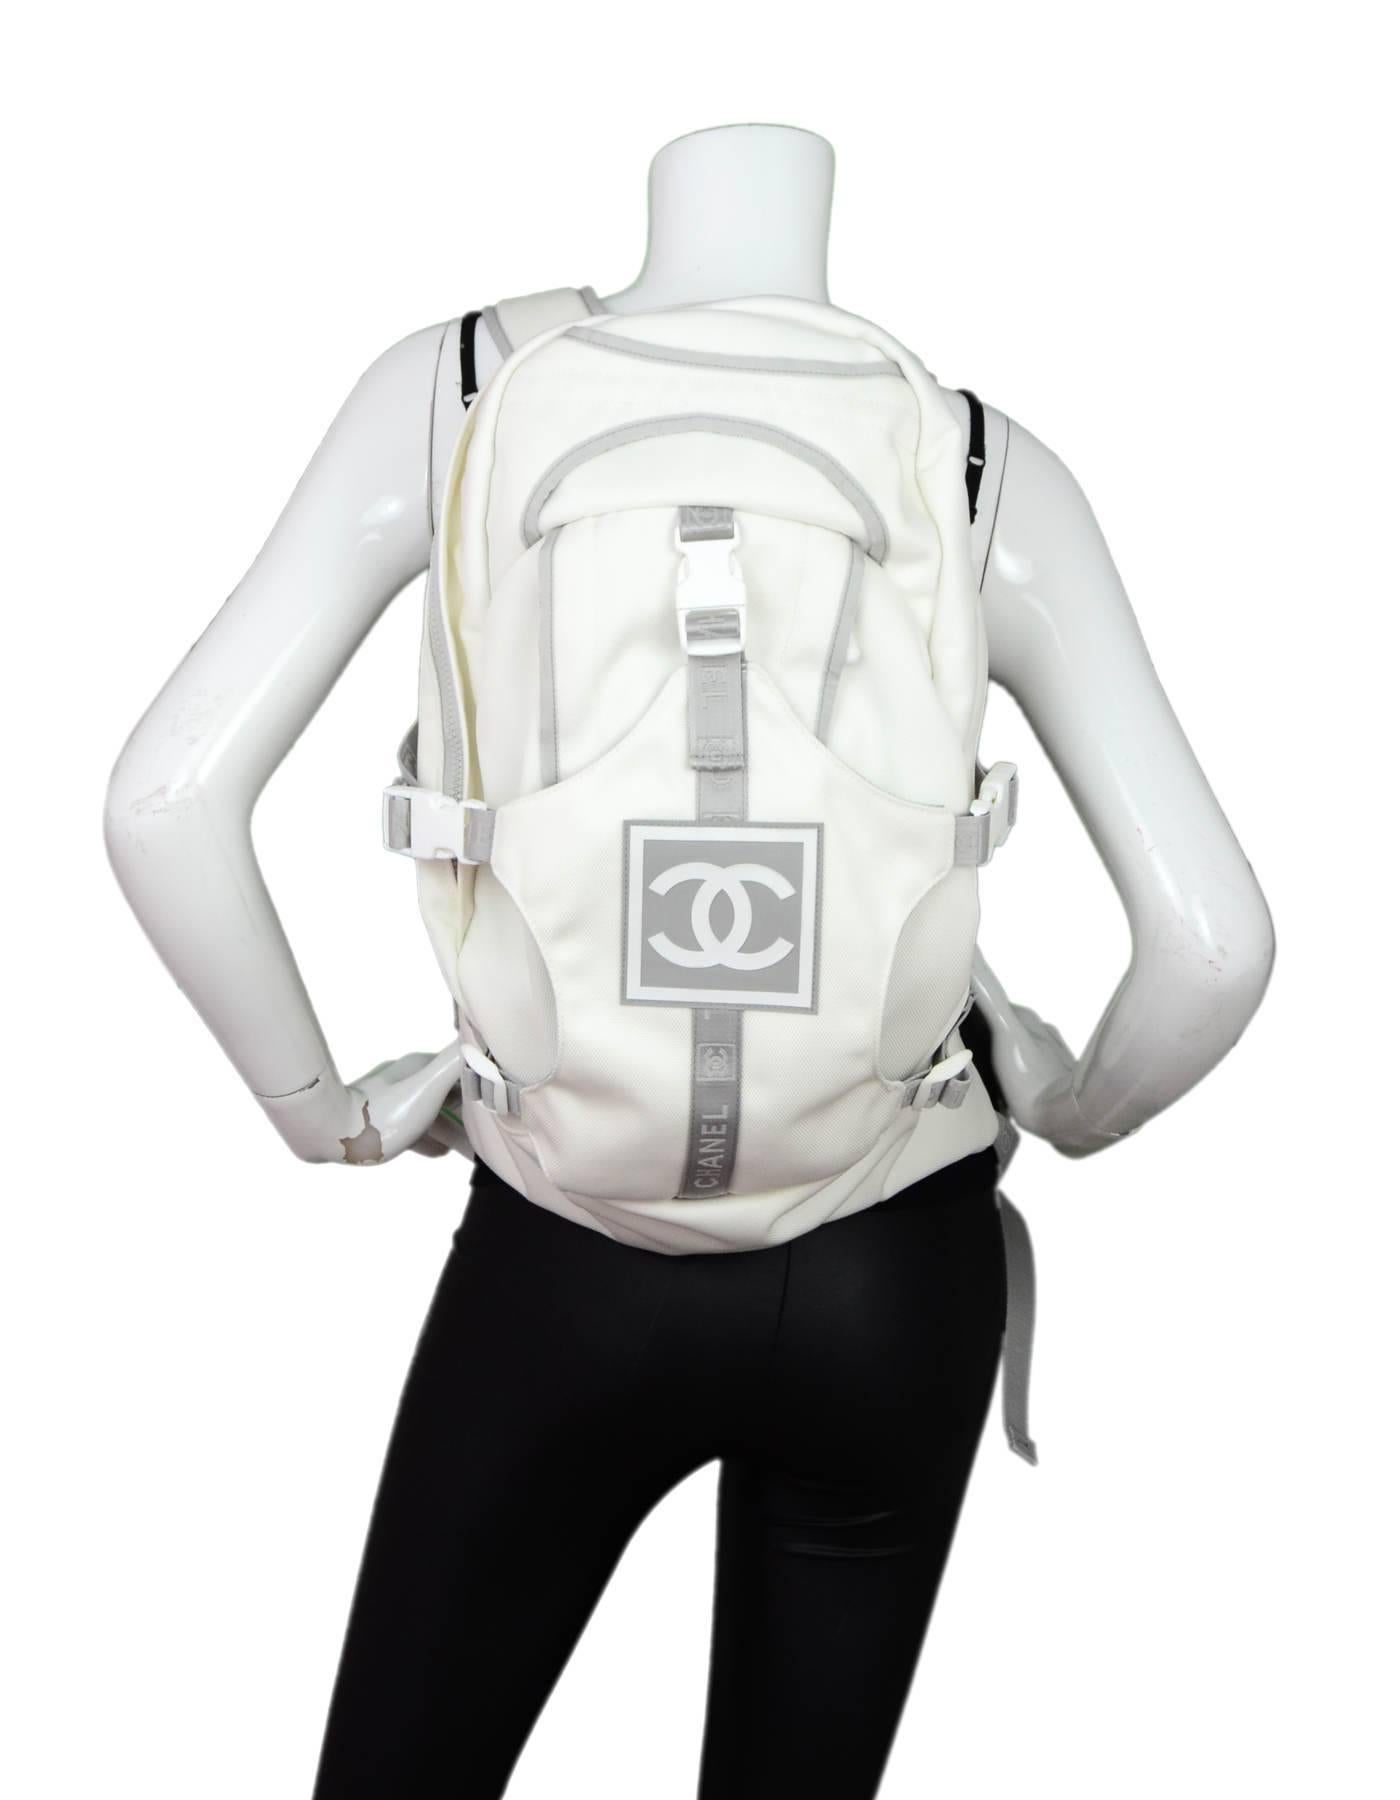 Chanel Sport White CC Canvas Backpack

Made In: Italy
Color: White, grey
Hardware: White
Materials: Canvas, rubber
Lining: Grey textile
Closure/Opening: Double zip top
Exterior Pockets: Front buckle area, zip pocket
Interior Pockets: Zip wall